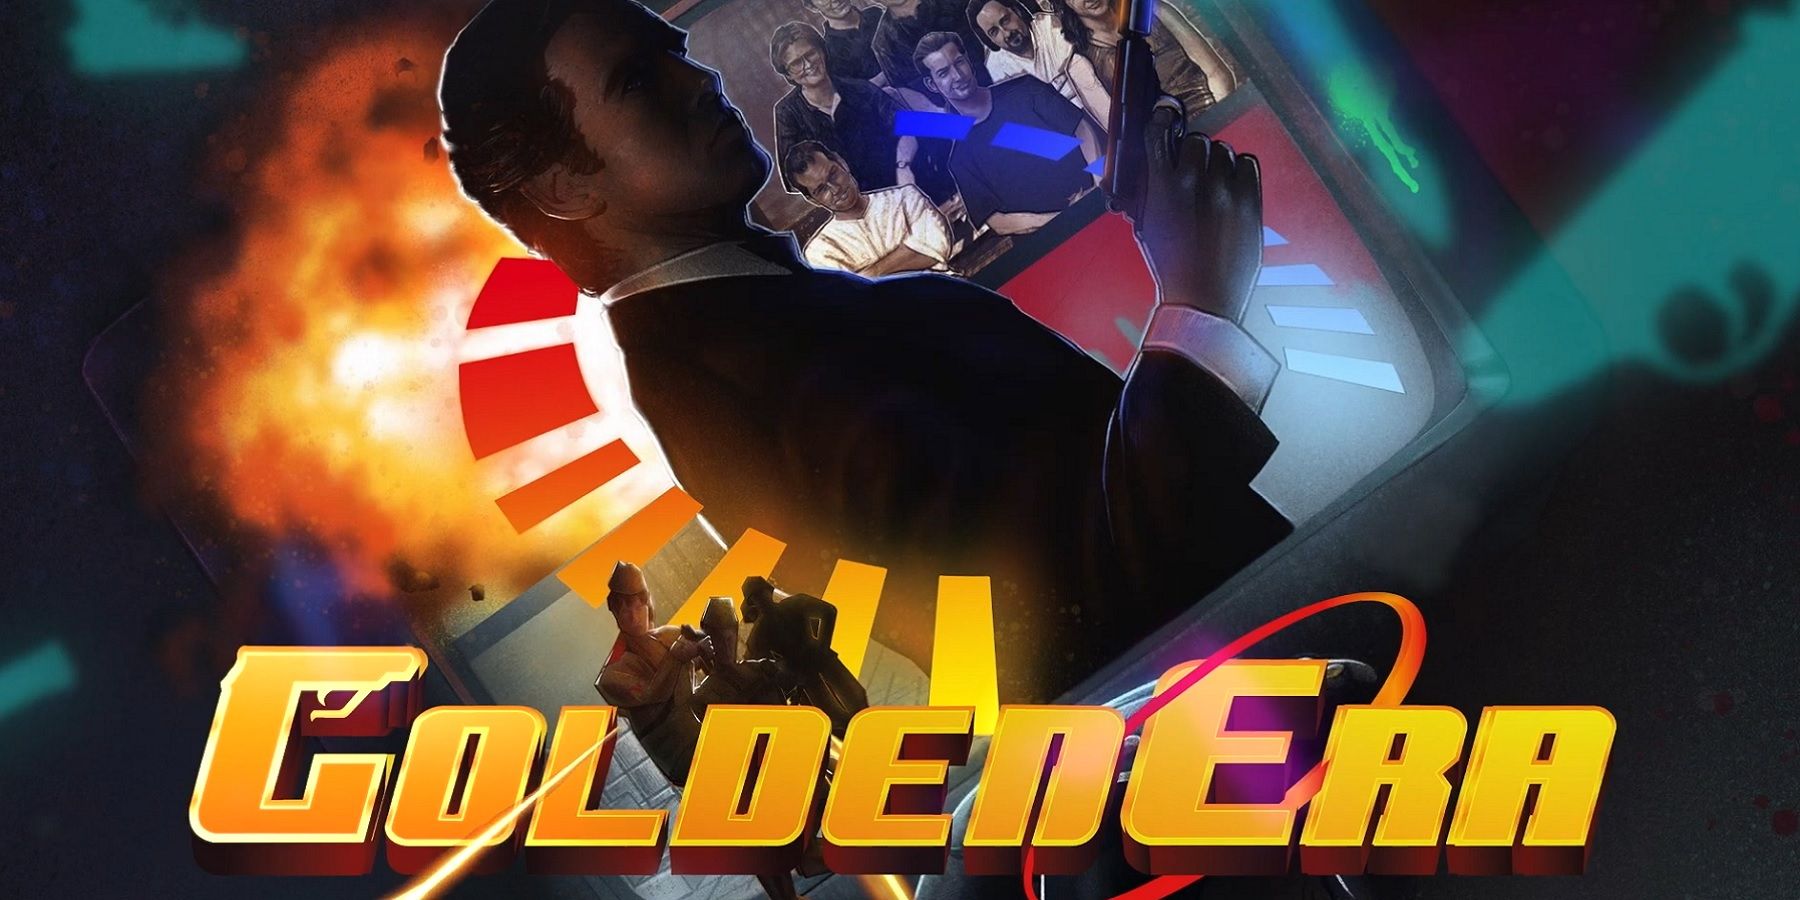 Image from the GoldeneEra trailer, a documentary that looks behind-the-scenes of GoldenEye 007 on N64.